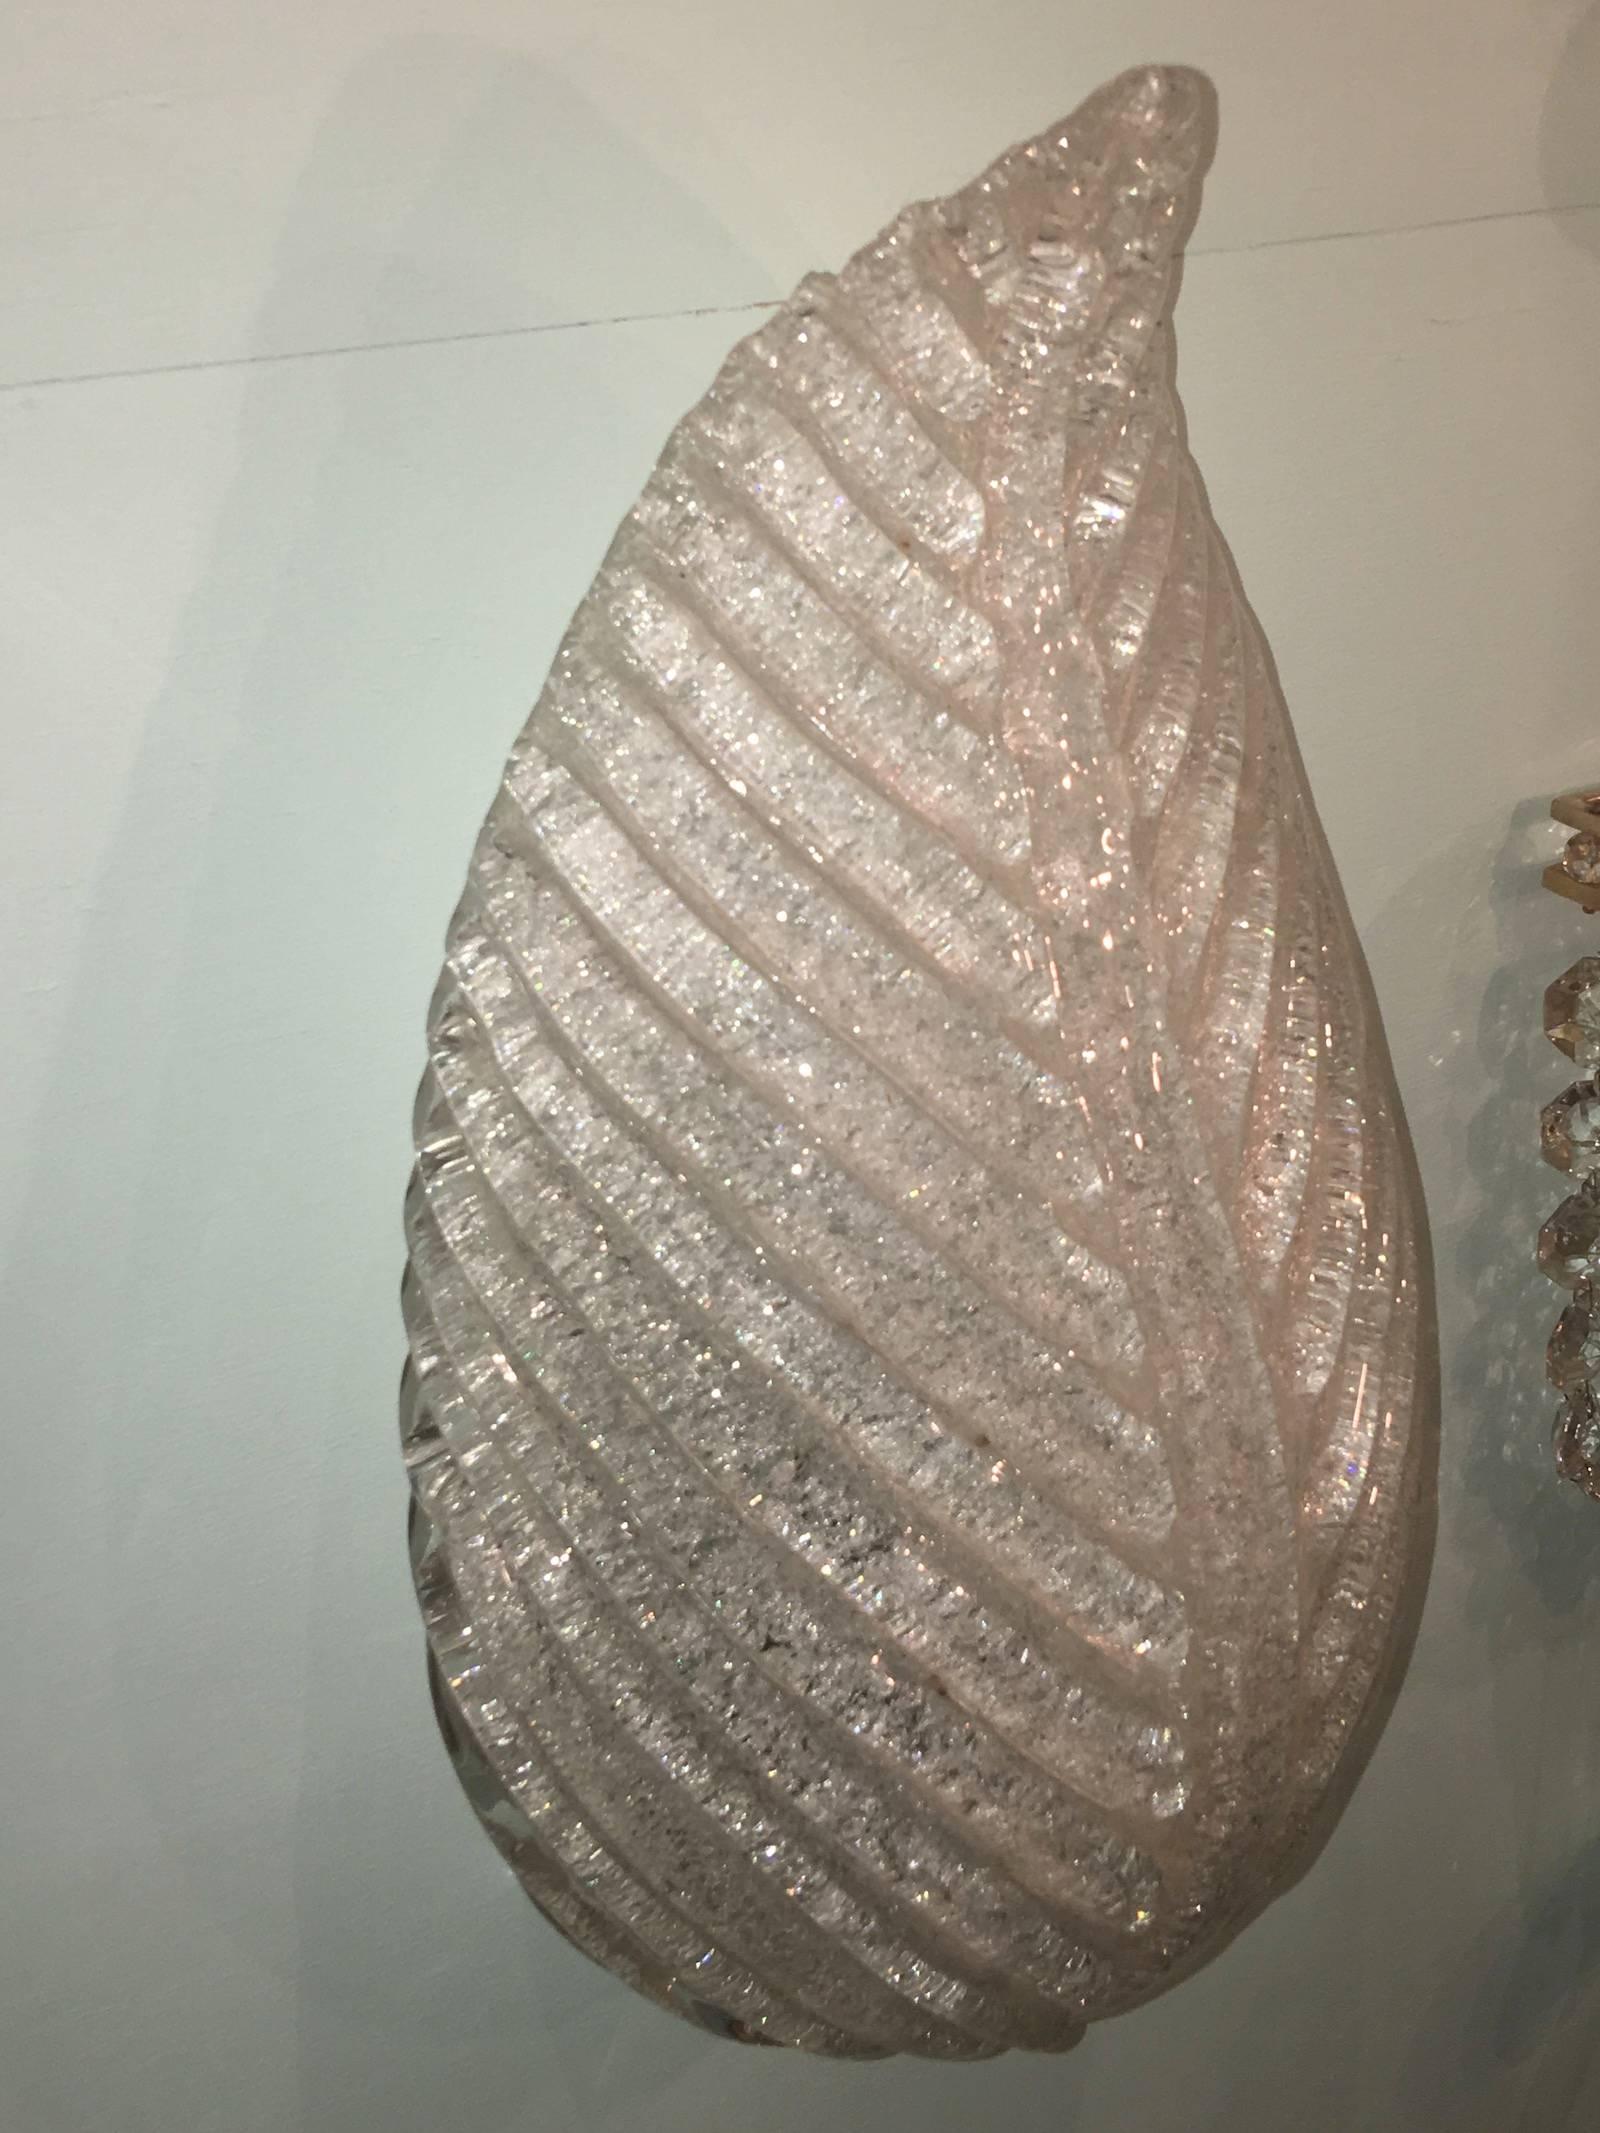 A beautiful single Murano glass sconce in leaf form. This fixture requires one European E 14 candelabra bulb, up to 40 watts.